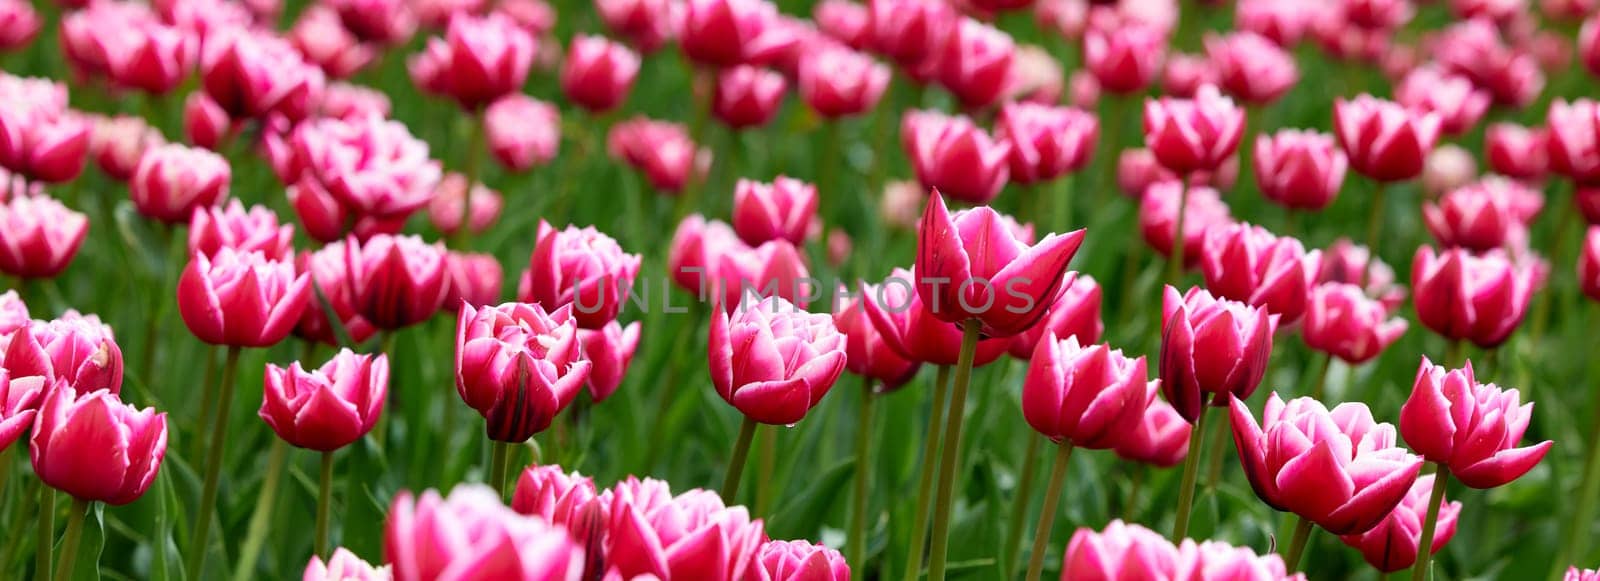 Beautiful bright colorful Spring tulips. Field of tulips. Tulip flowers blooming in the garden. Panning over many tulips in a field in spring. Colorful field of flowers in nature. by EvgeniyQW